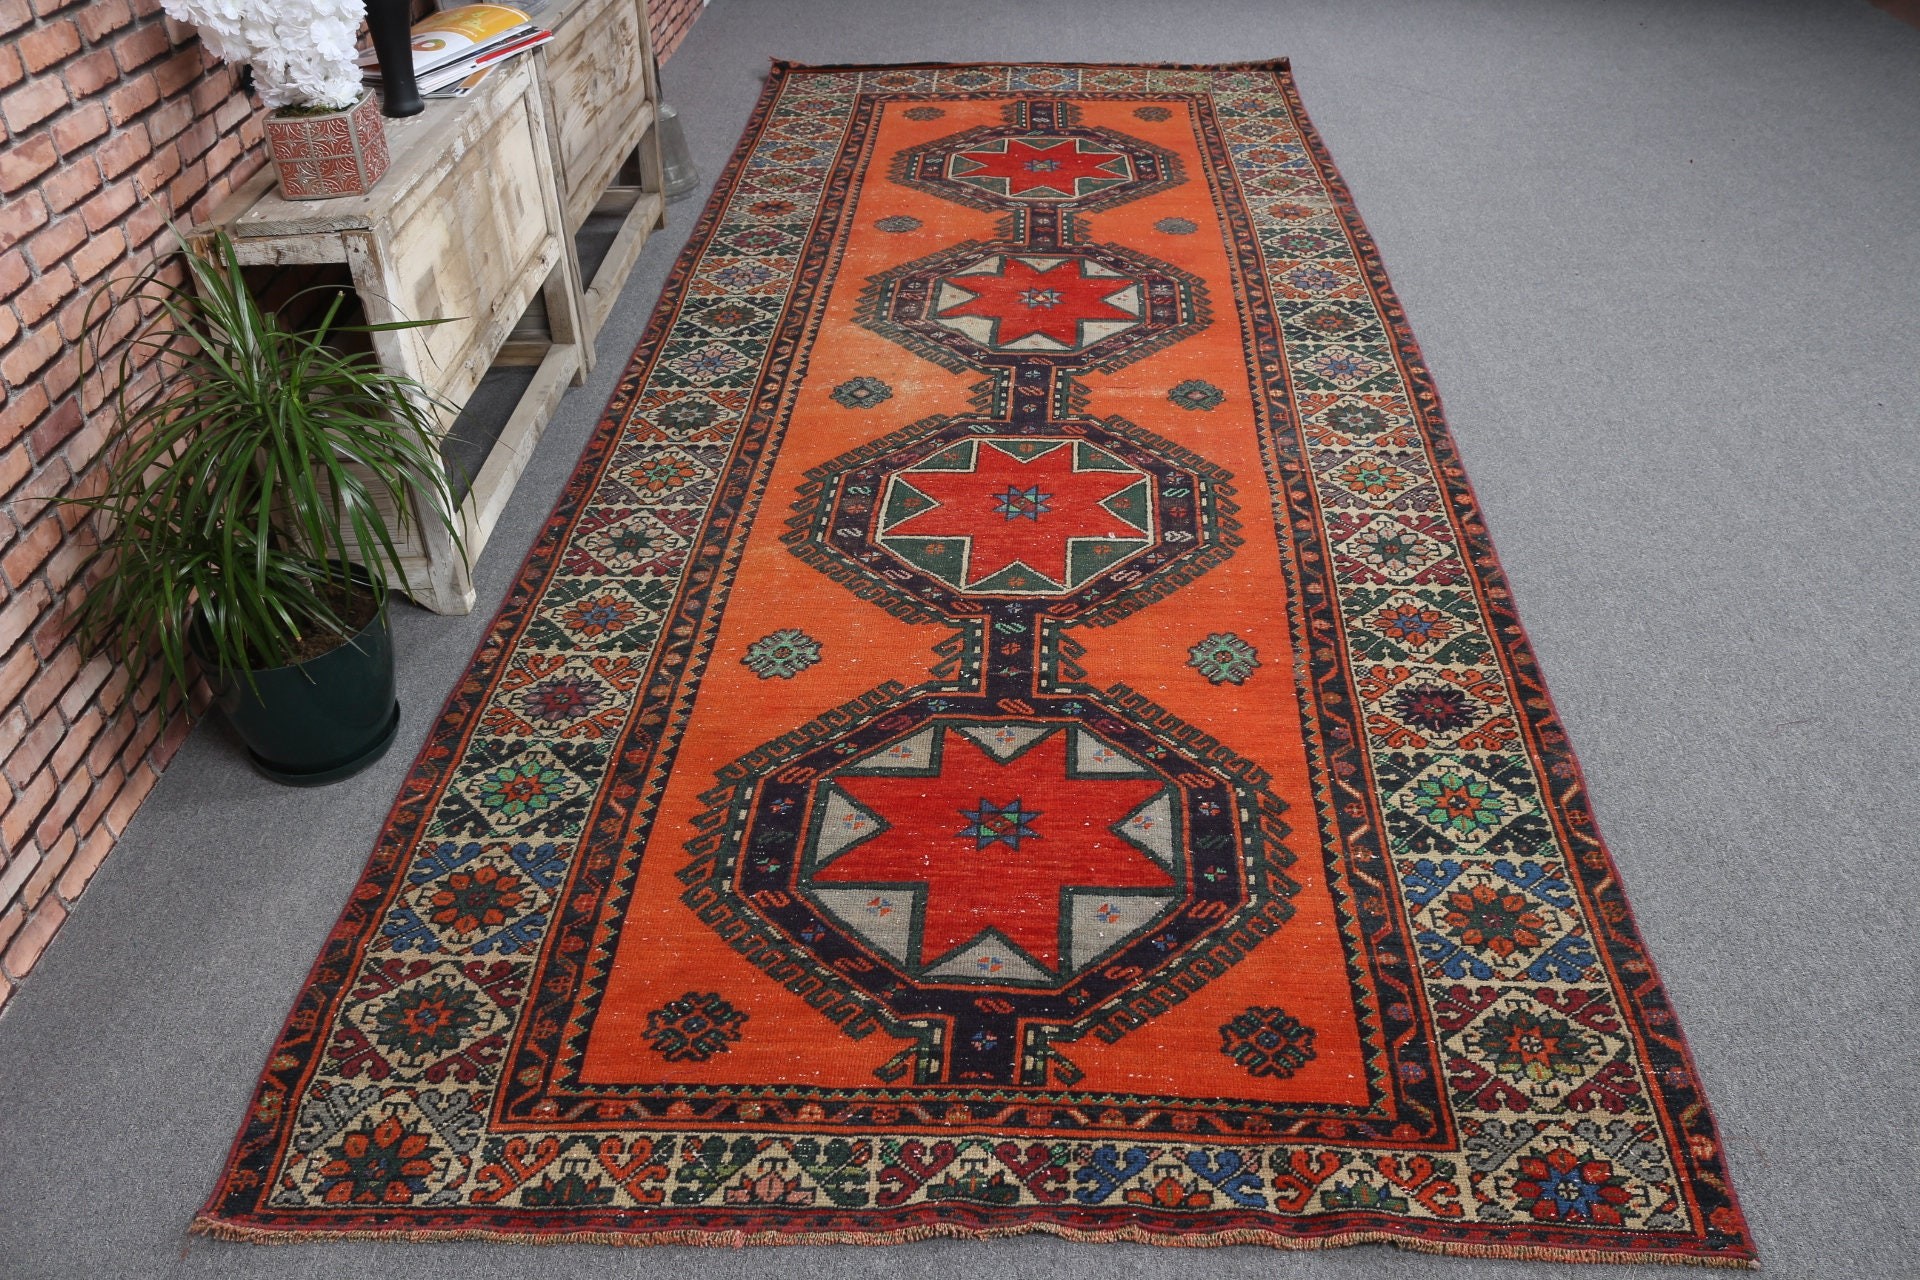 5x12.6 ft Runner Rug, Stair Rug, Abstract Rugs, Vintage Rug, Rugs for Kitchen, Turkish Rugs, Bedroom Rug, Red Oushak Rug